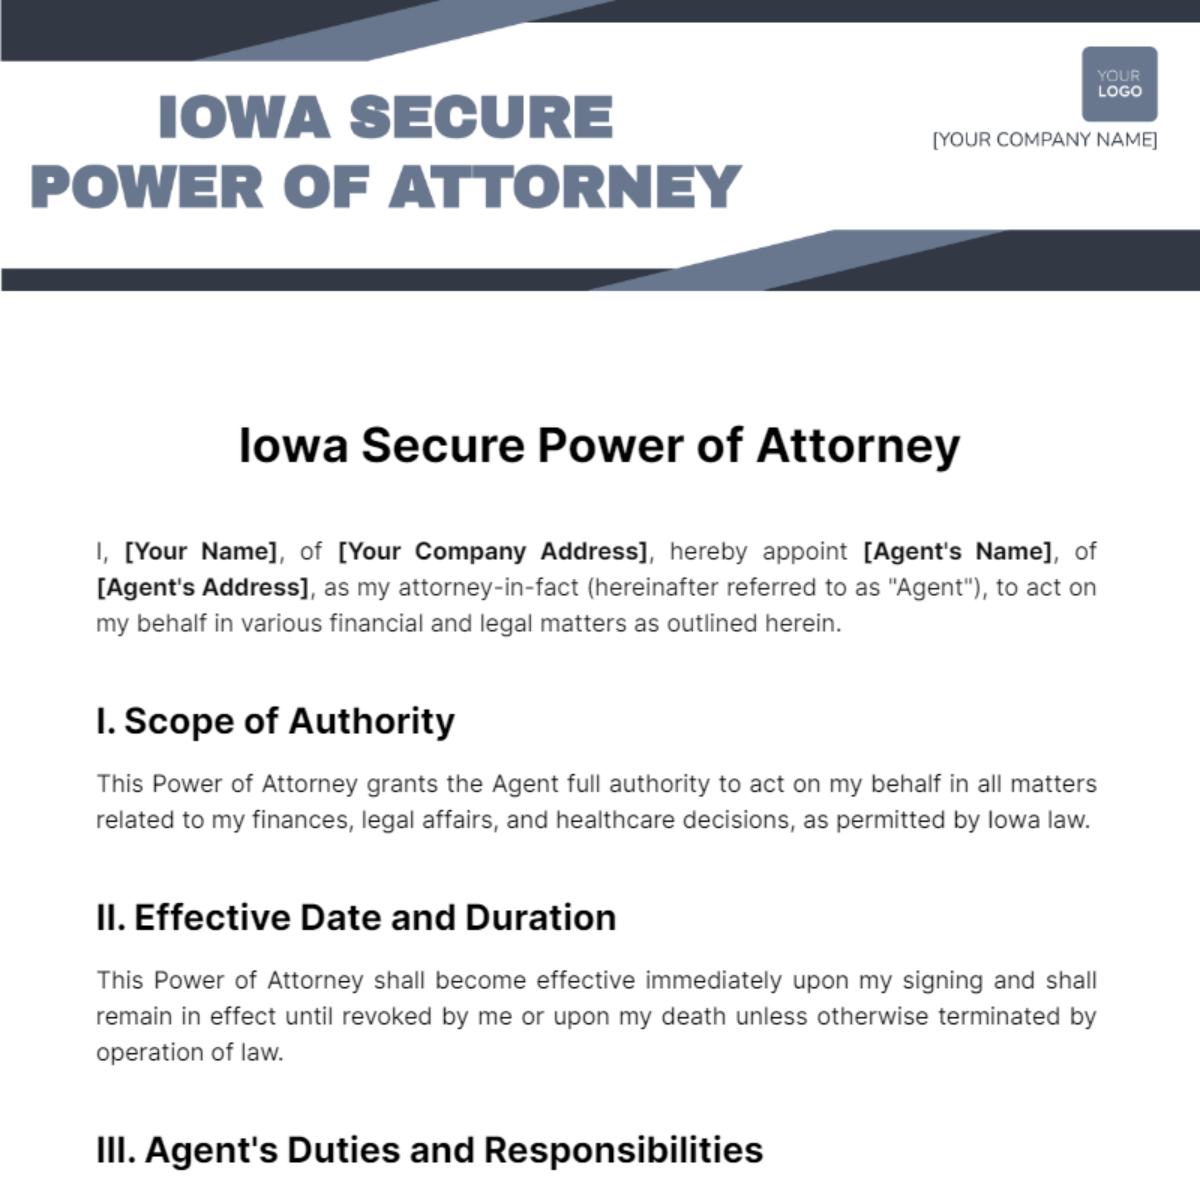 Iowa Secure Power of Attorney Template